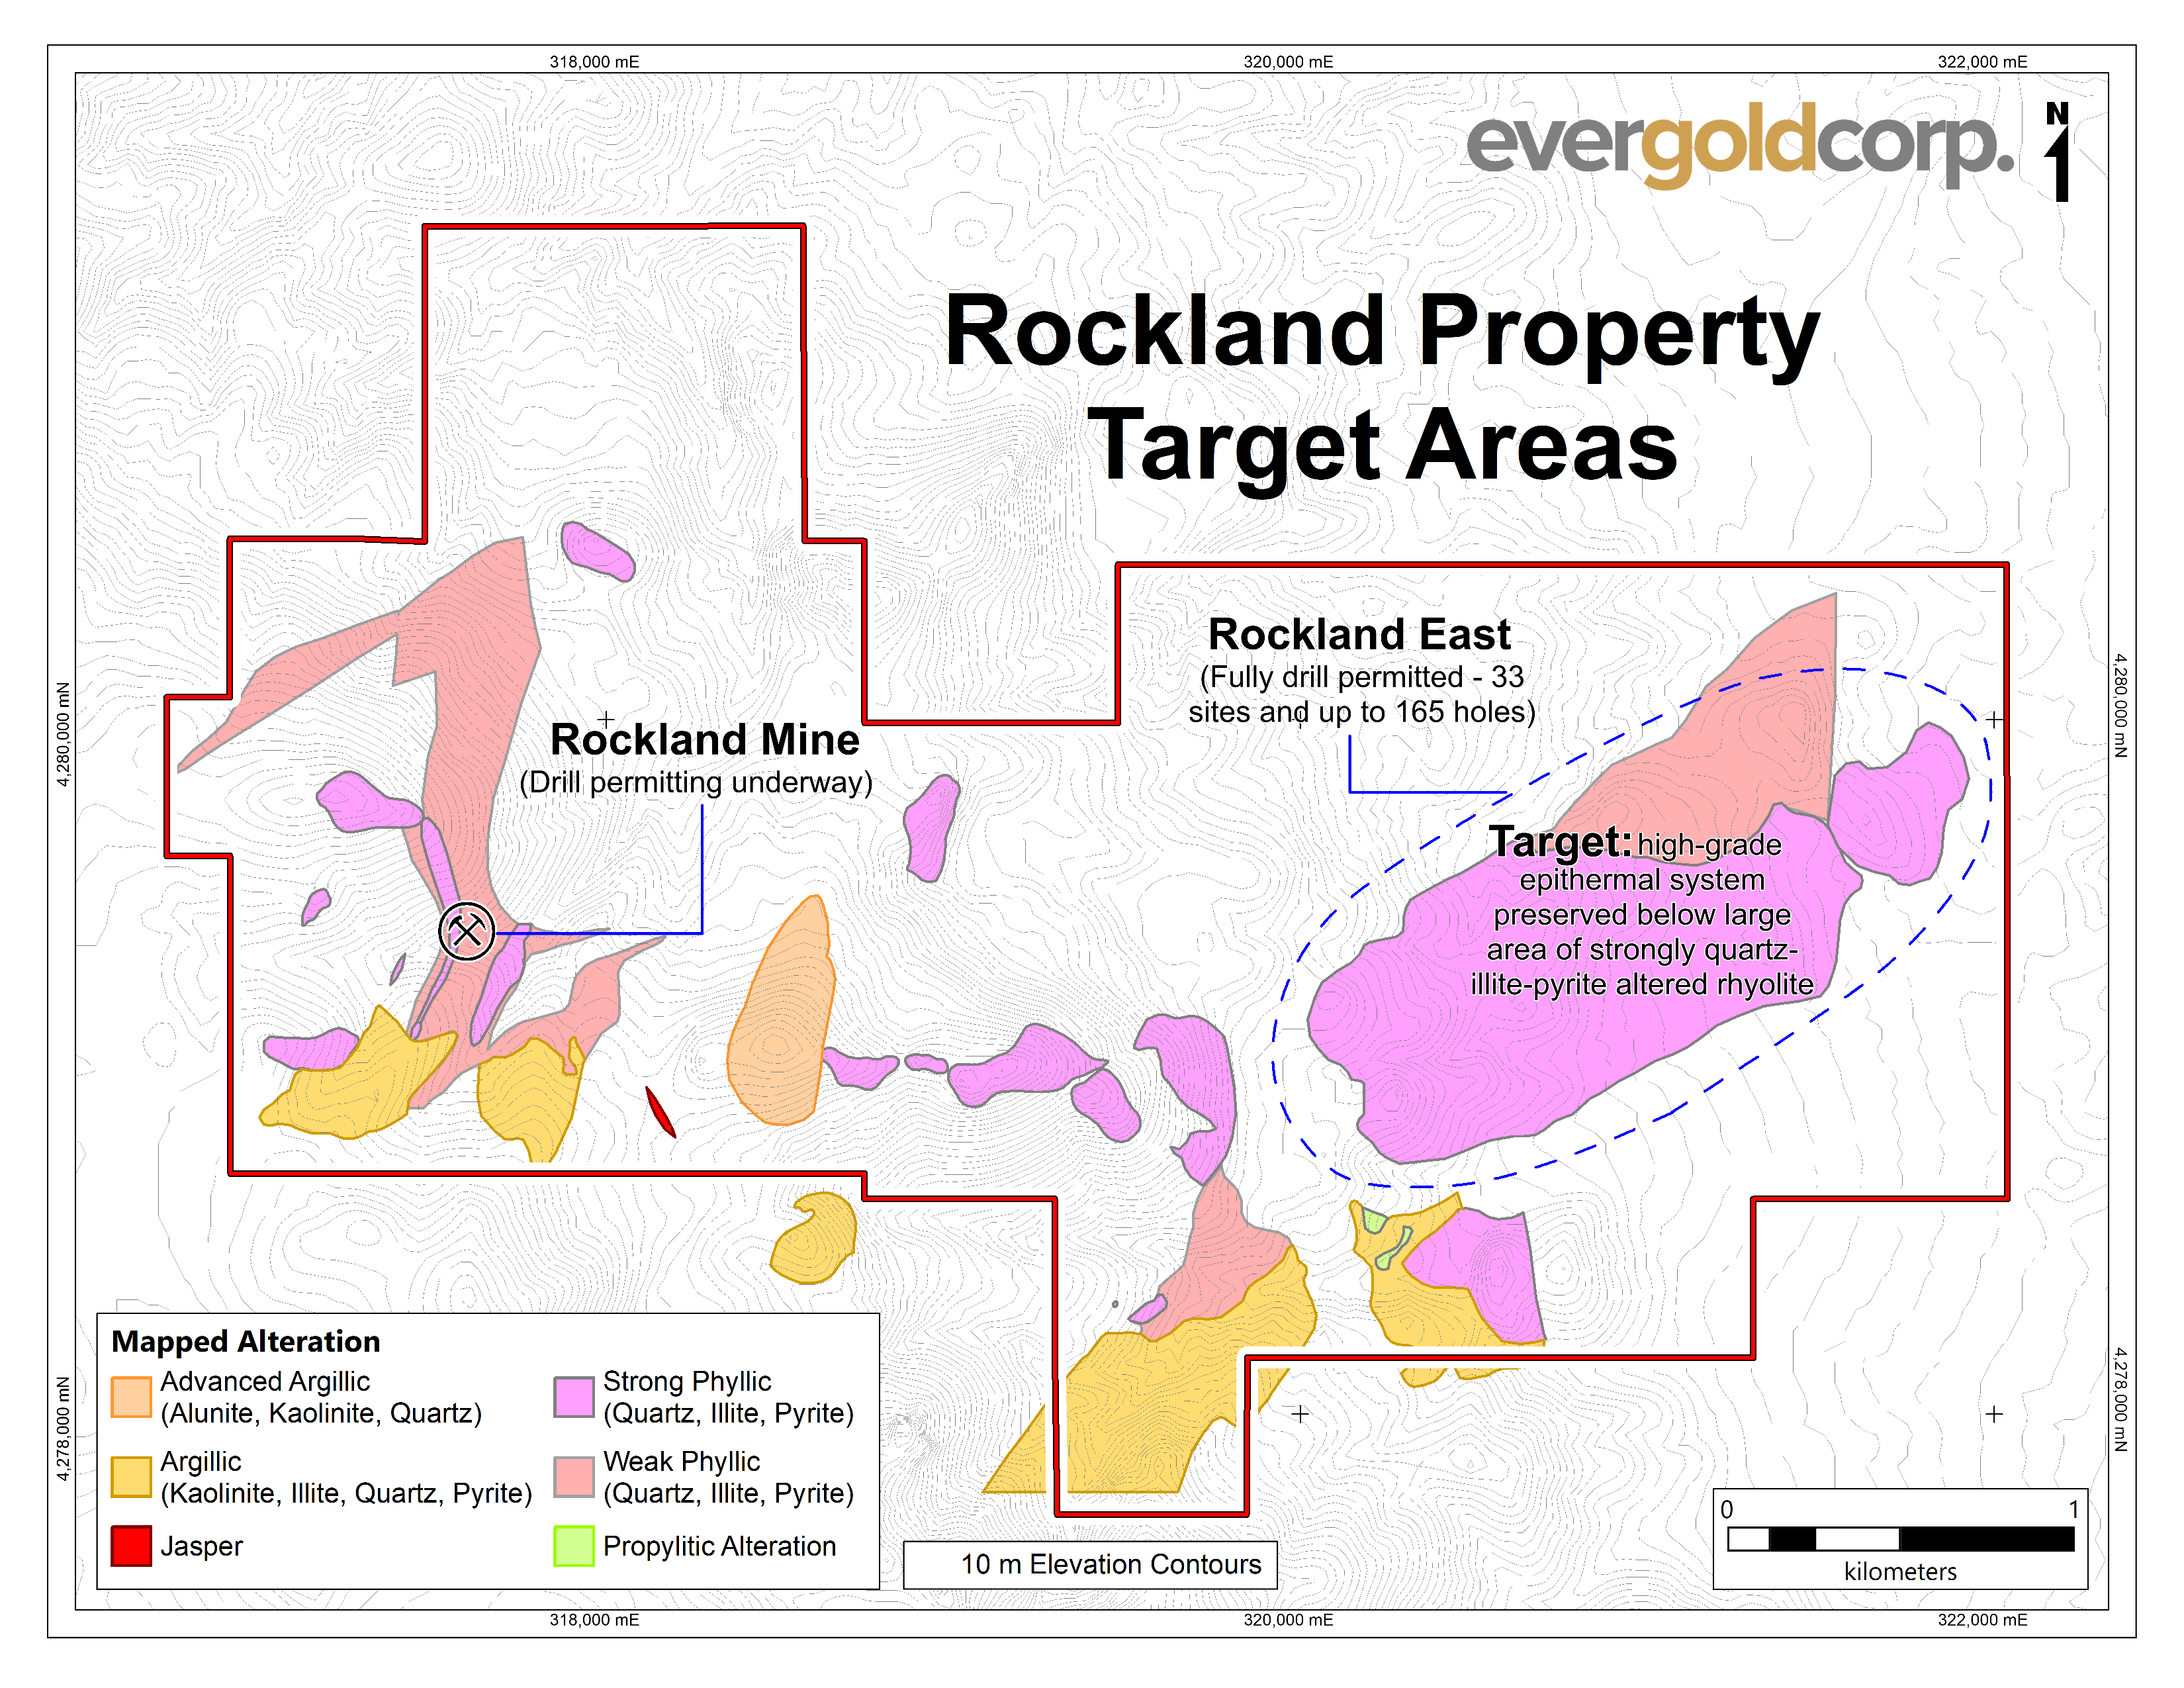 Figure 2 - Rockland Property Target Areas